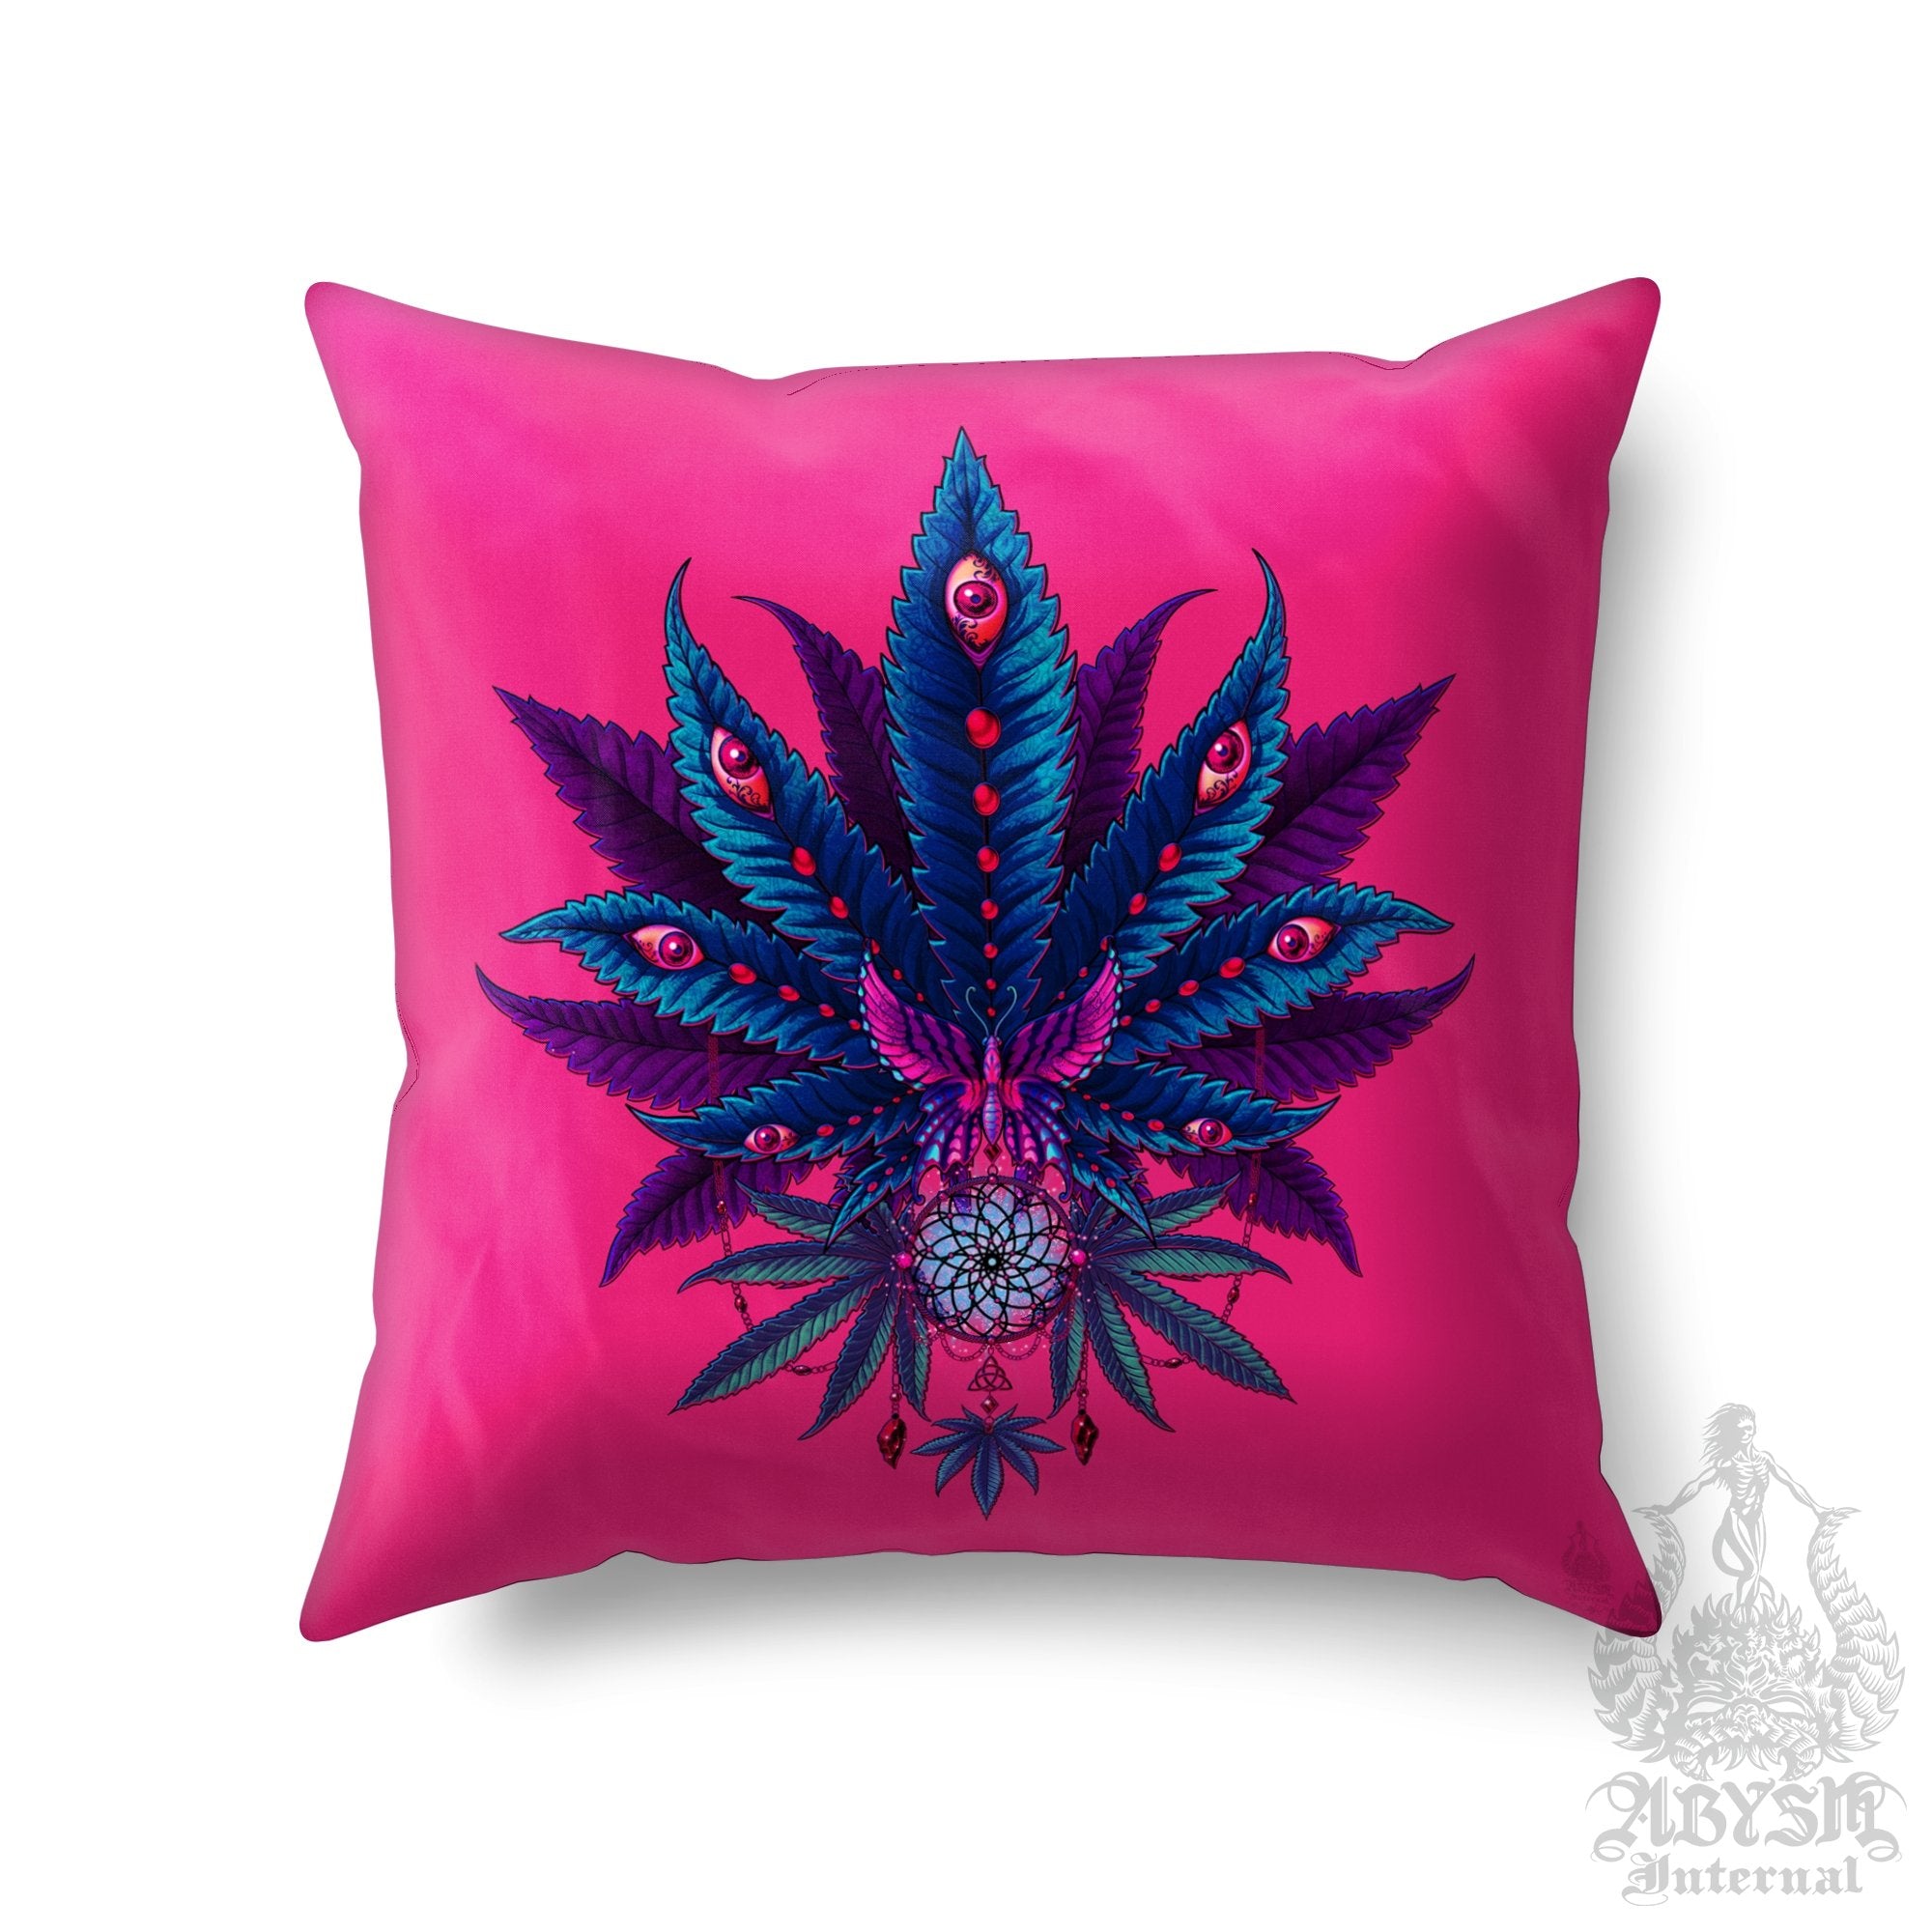 Weed Throw Pillow, Cannabis Shop Decor, Vaporwave Decorative Accent Cushion, Retrowave 80s Room Decor, Synthwave and Psychedelic 420 Art Print - Neon I - Abysm Internal